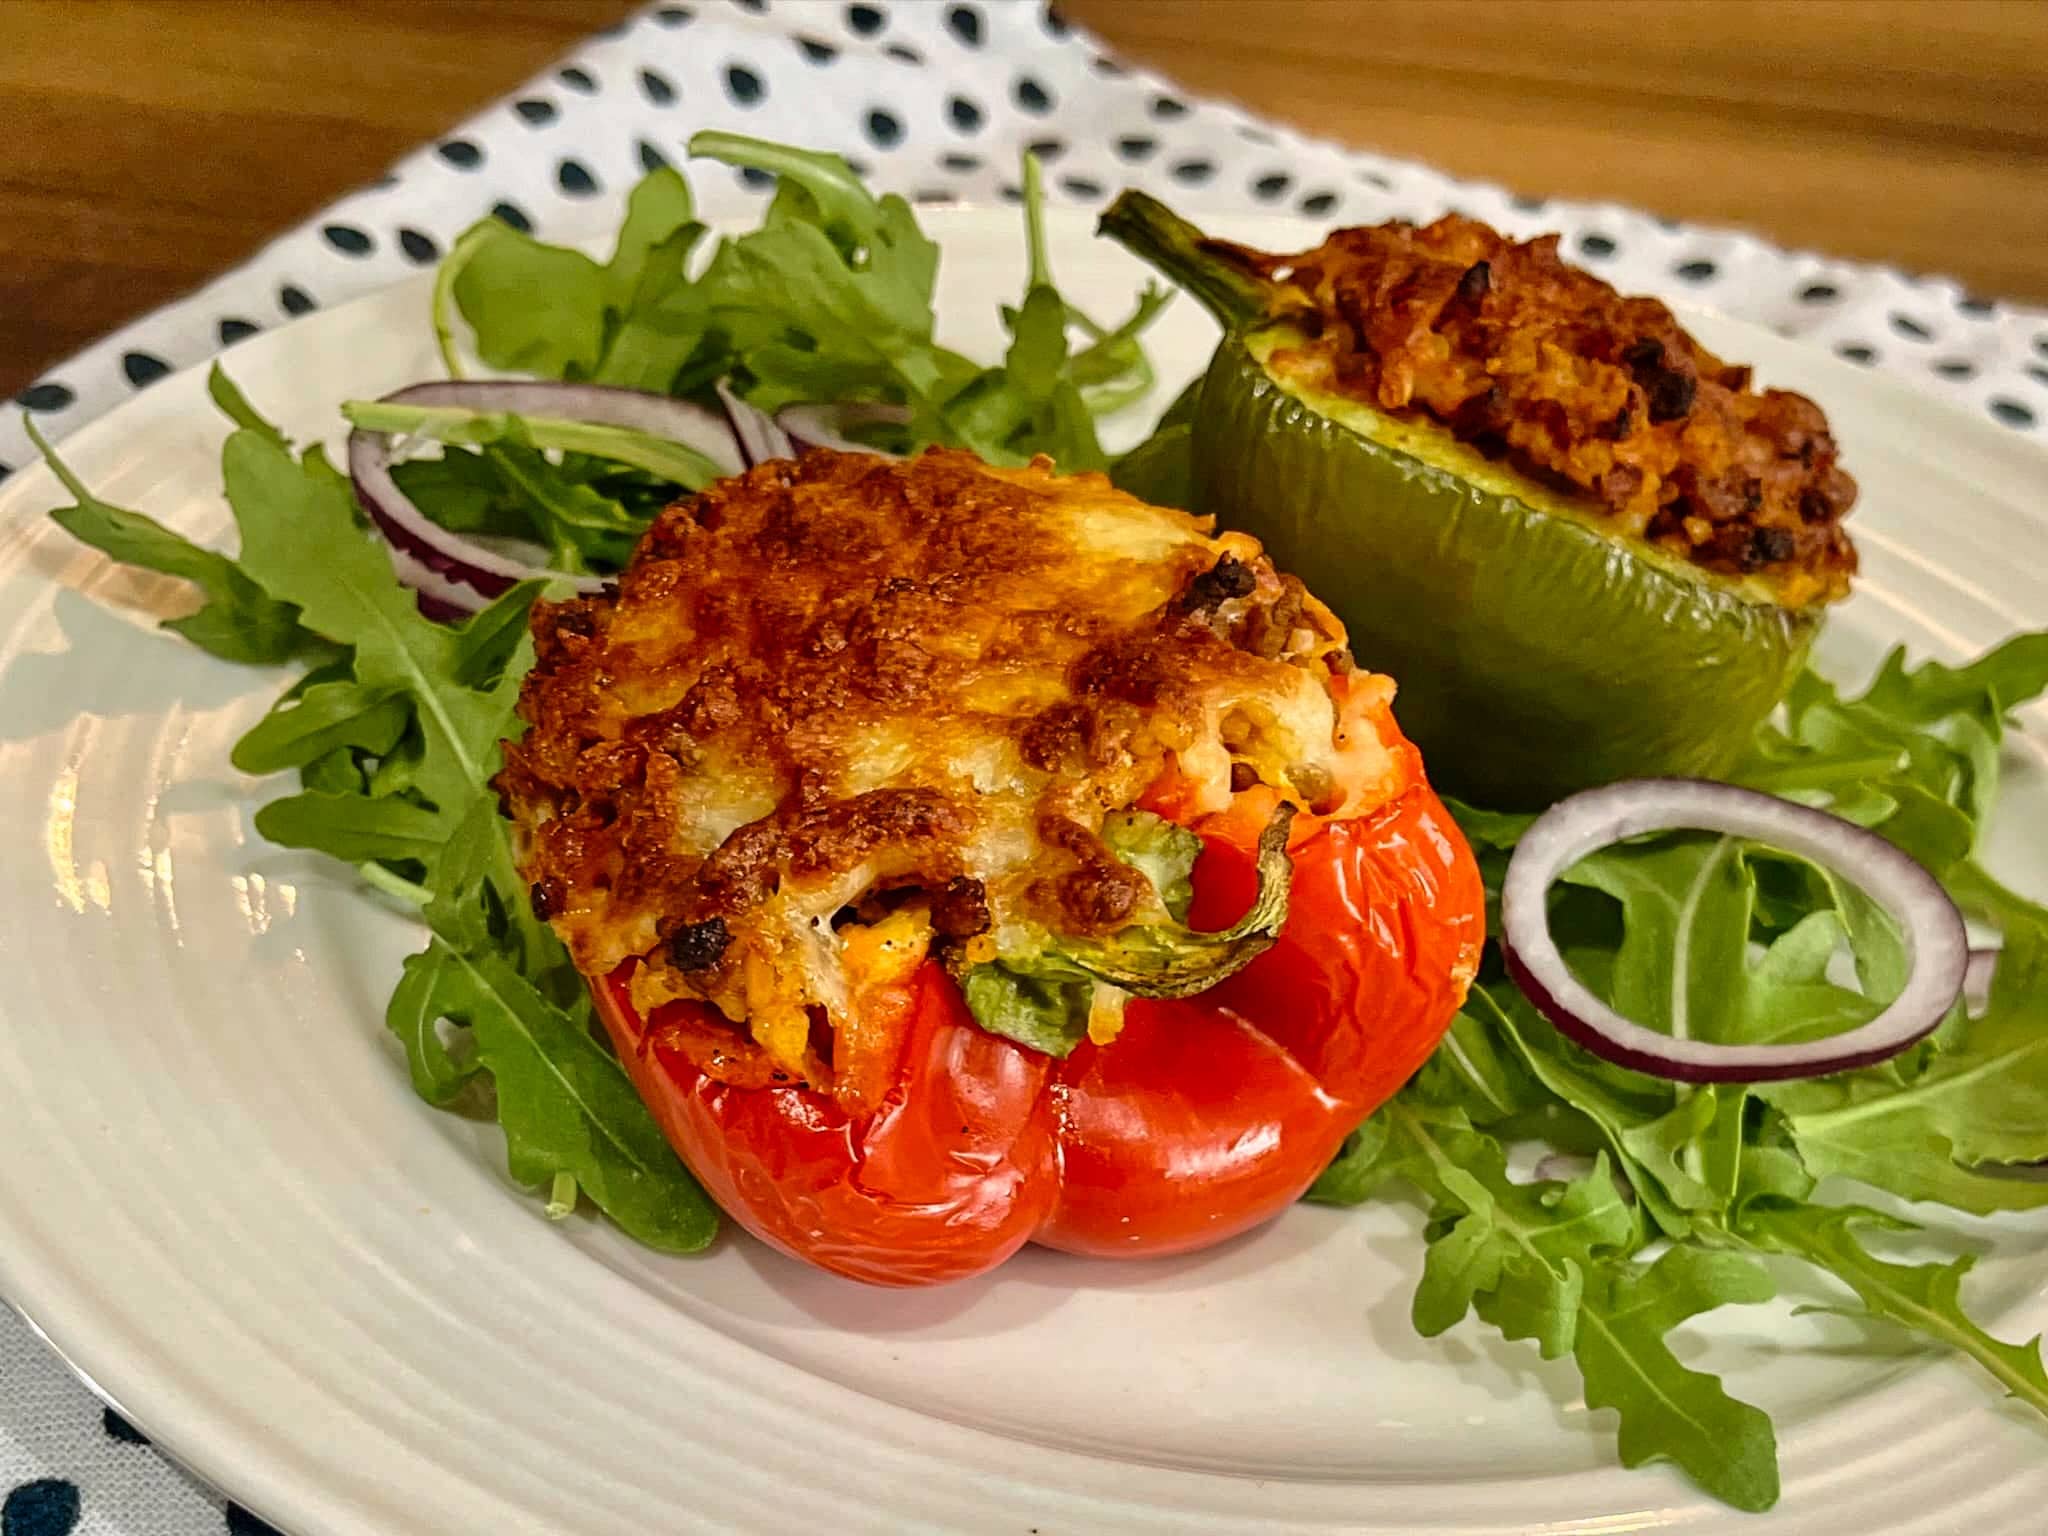 Stuffed Peppers with bulgur, beef and pork